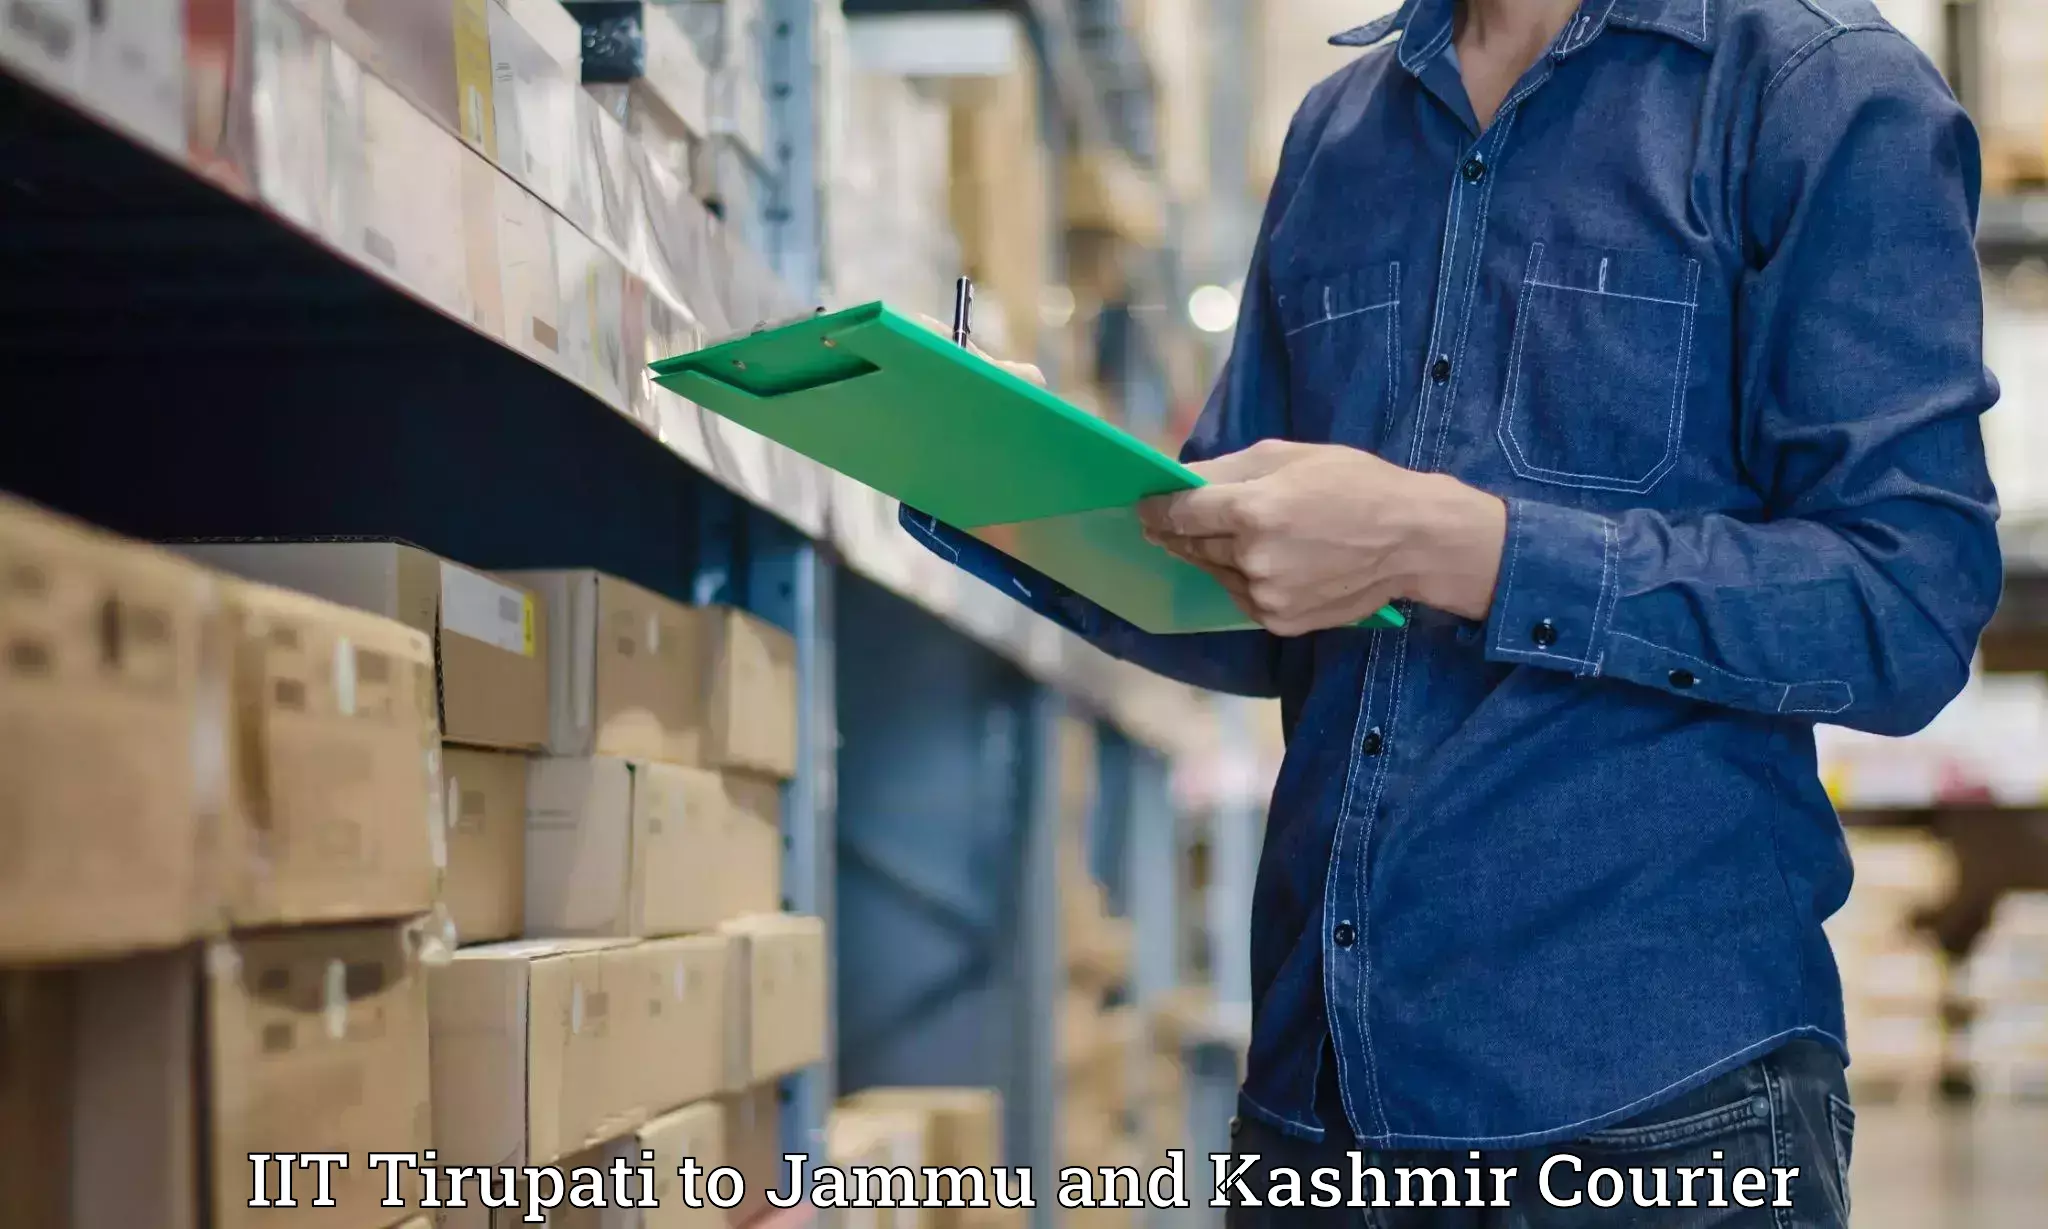 Easy access courier services IIT Tirupati to Jammu and Kashmir